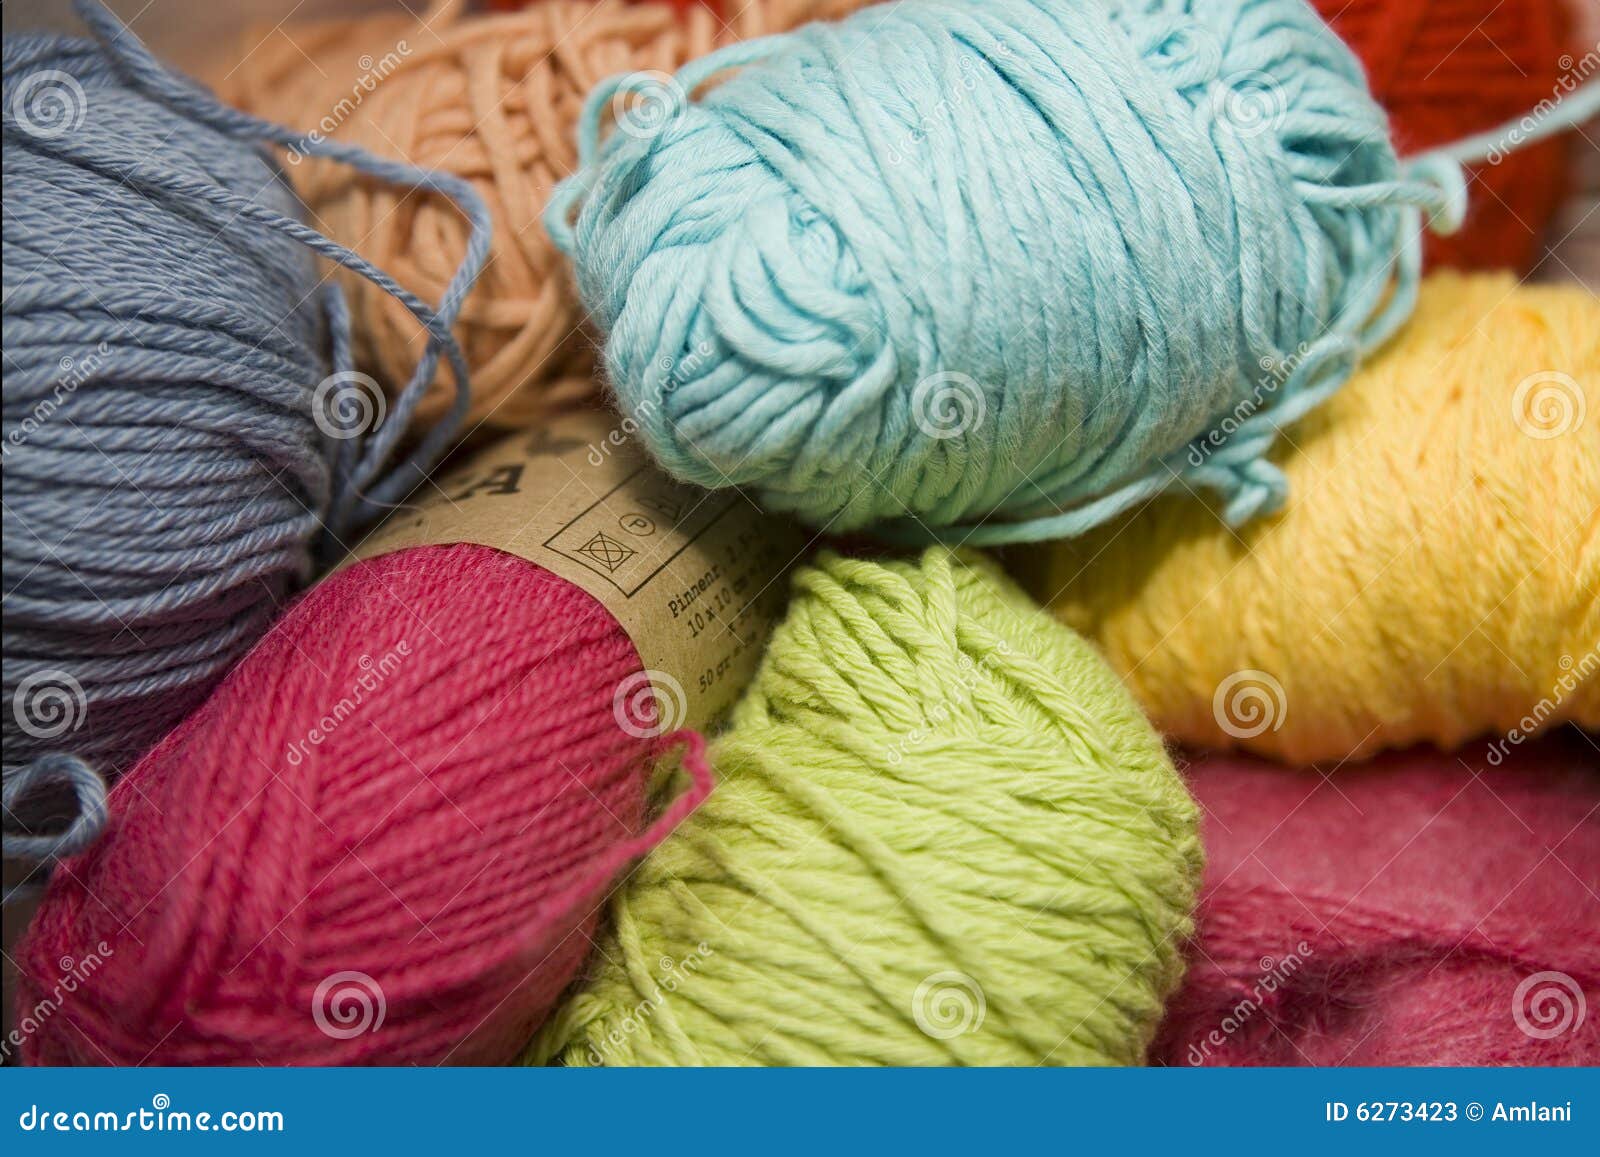 197 Bundles Yarn Stock Photos - Free & Royalty-Free Stock Photos from  Dreamstime